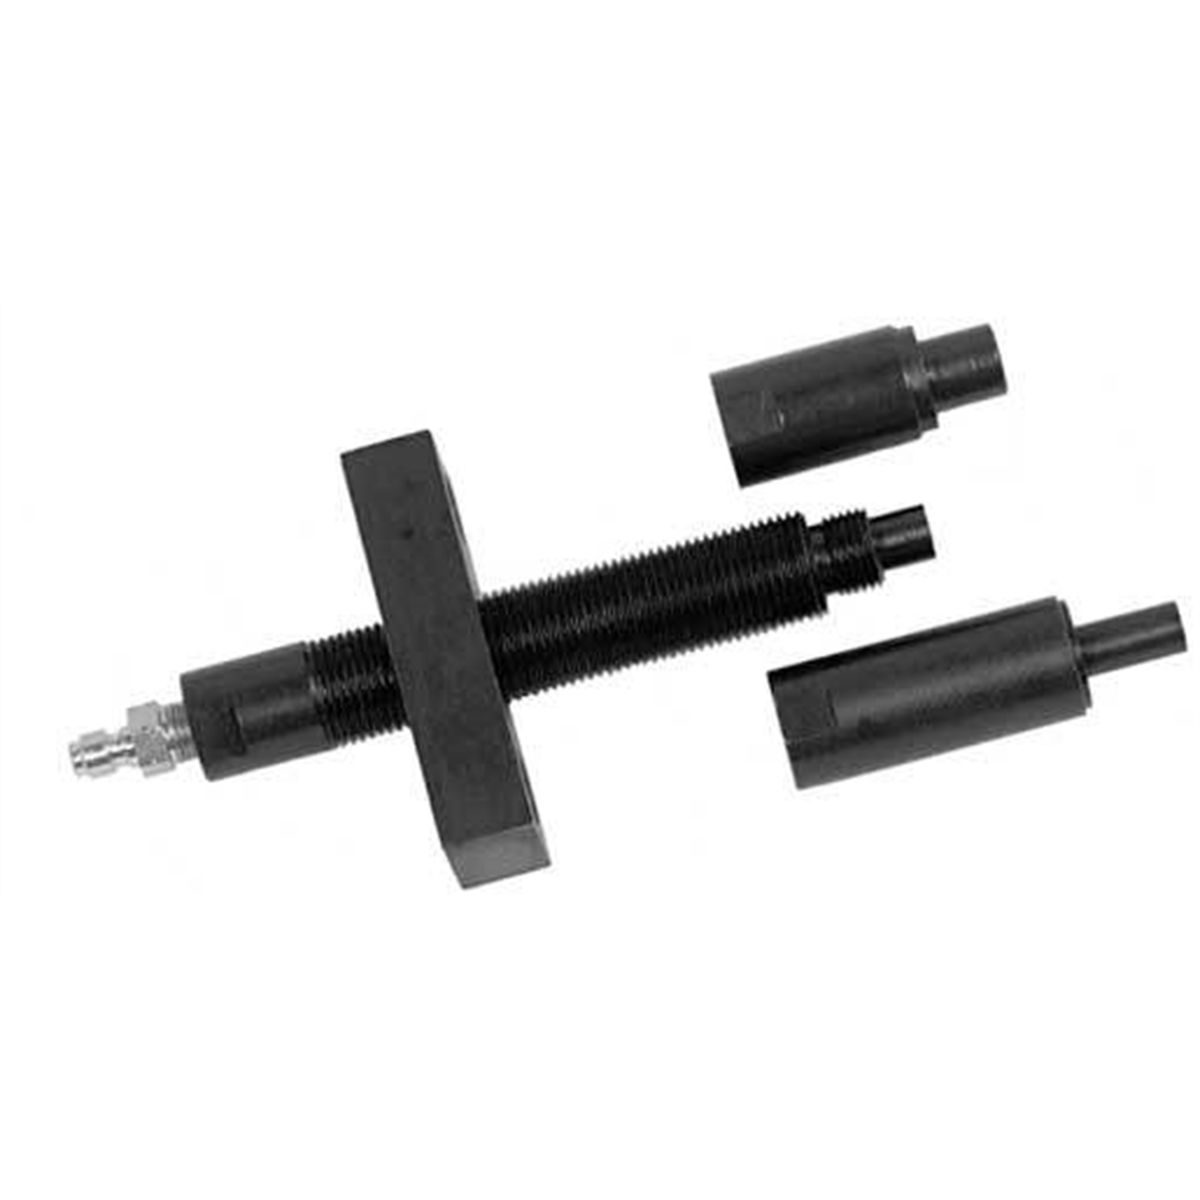 Diesel Adapter for 21mm Injectors & Bosch Type Injector